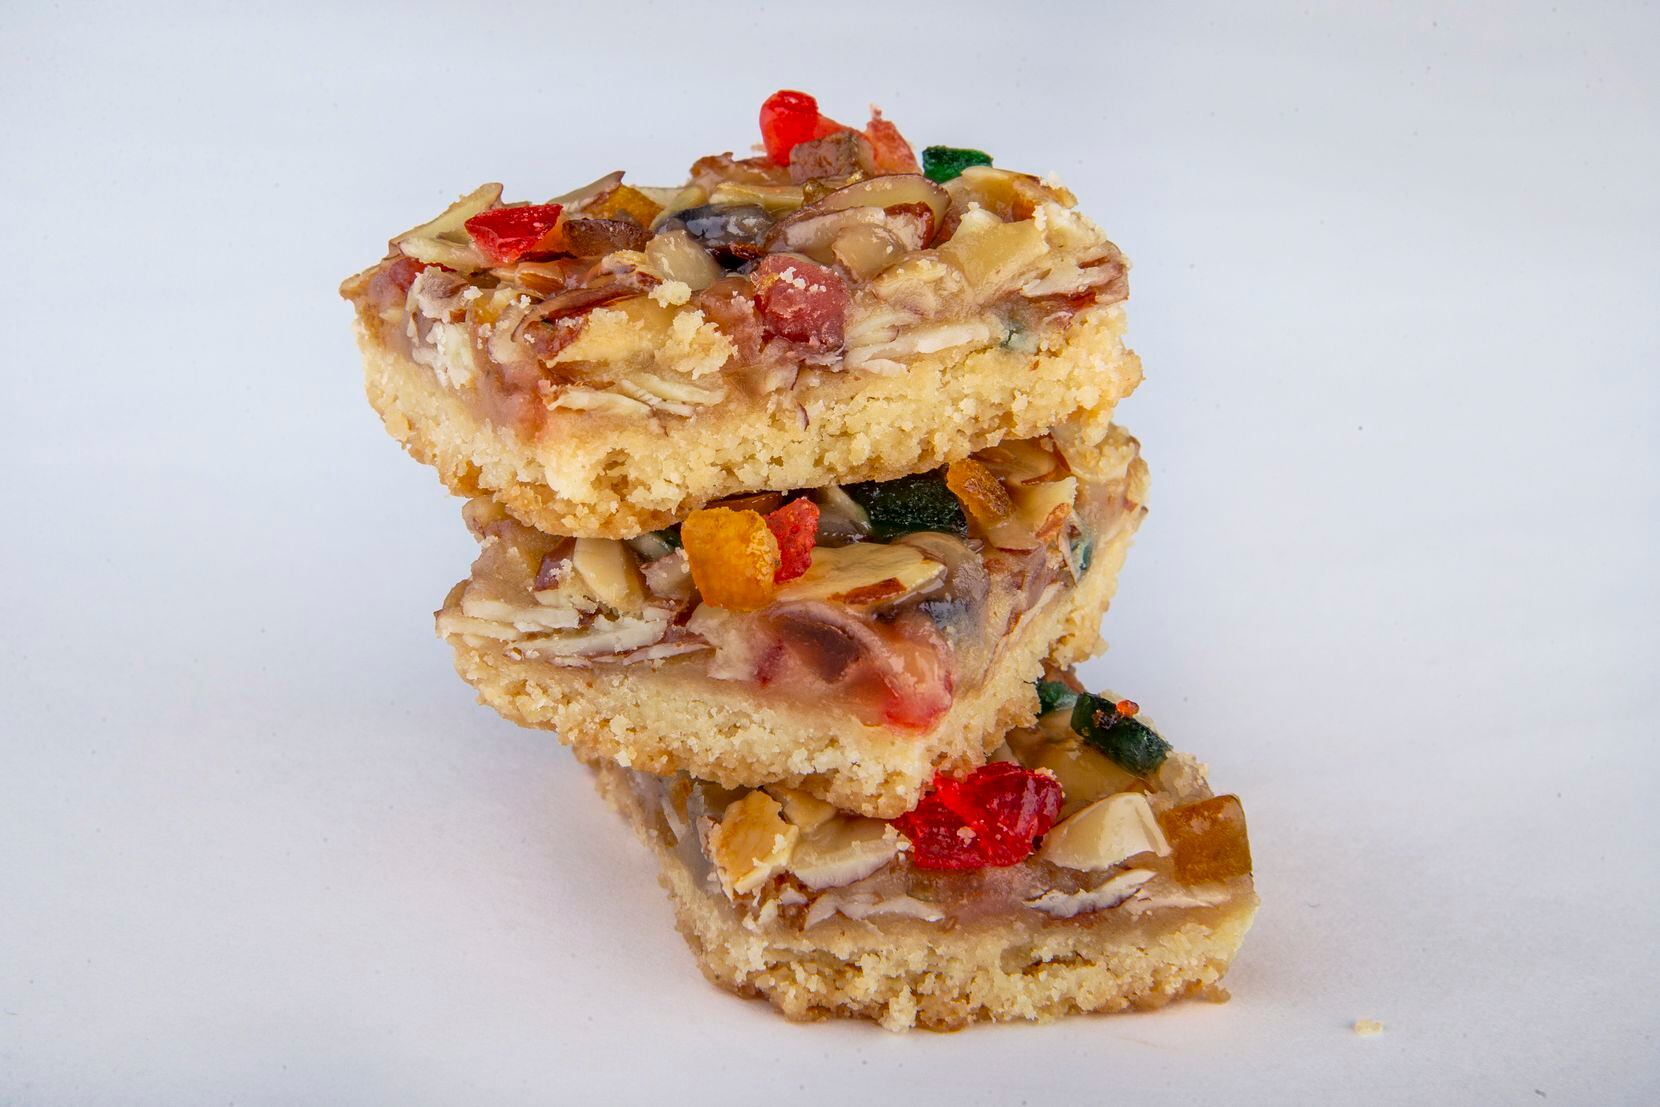 The good taste lama florentines bars made by Lama Asmar won second place in the cookie bar...